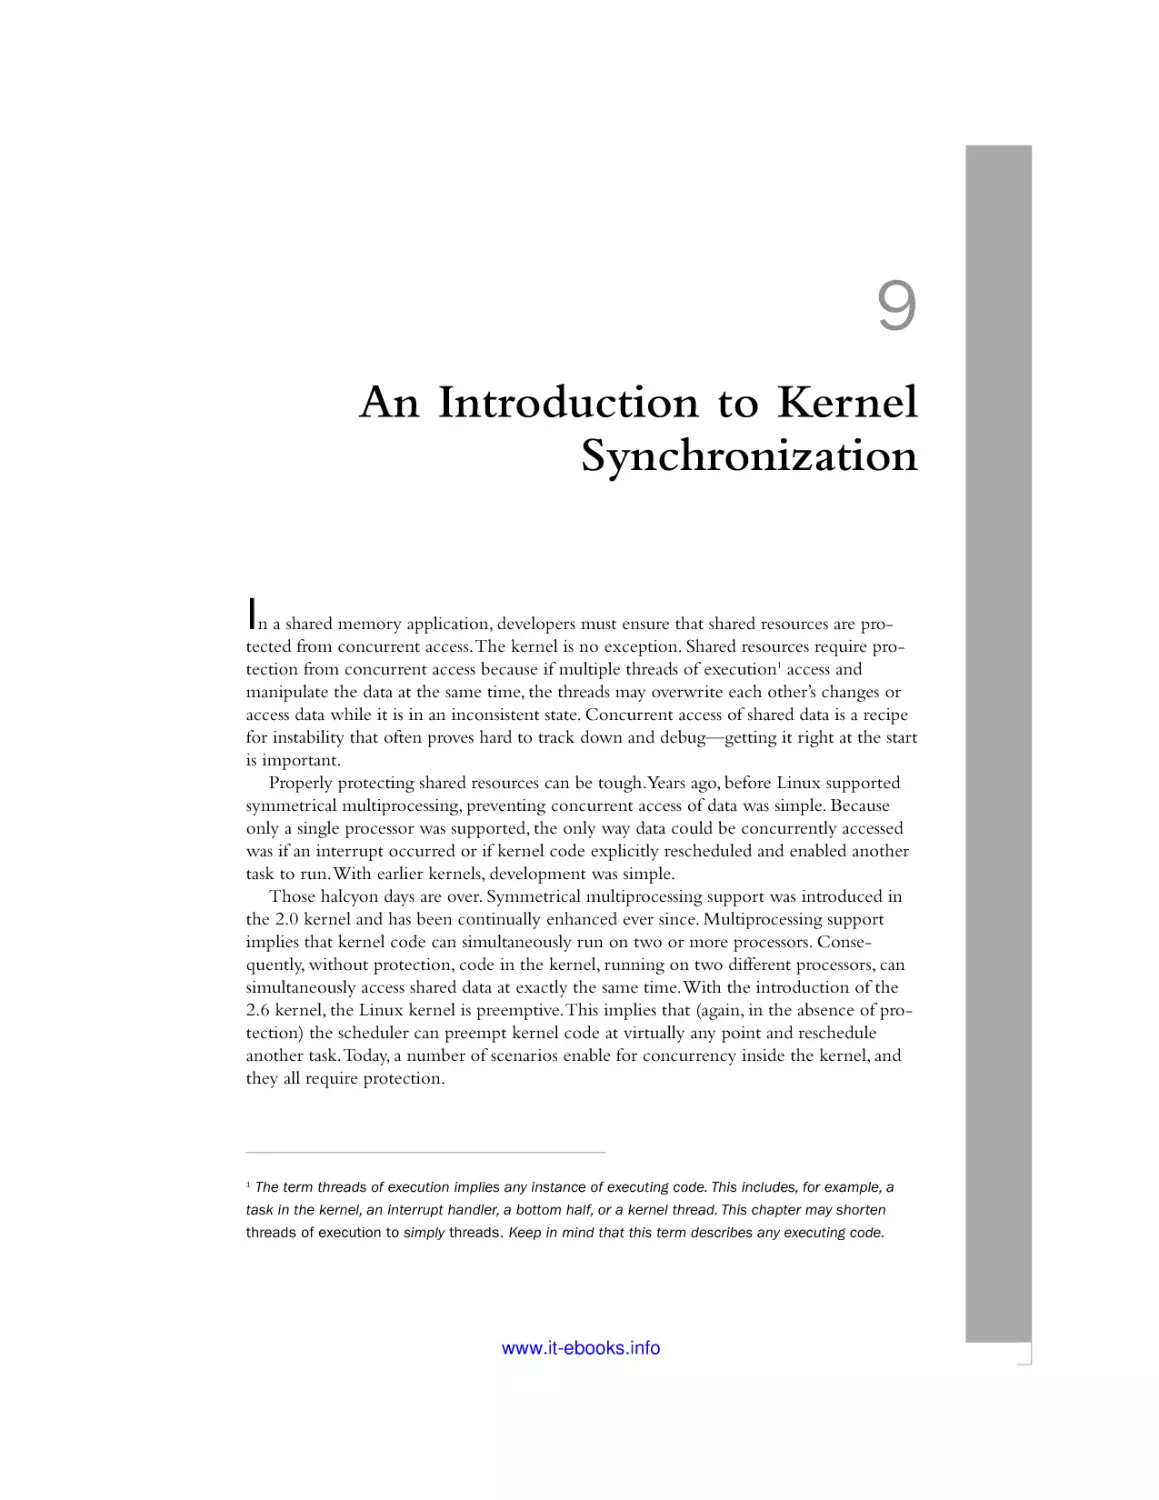 9 An Introduction to Kernel Synchronization